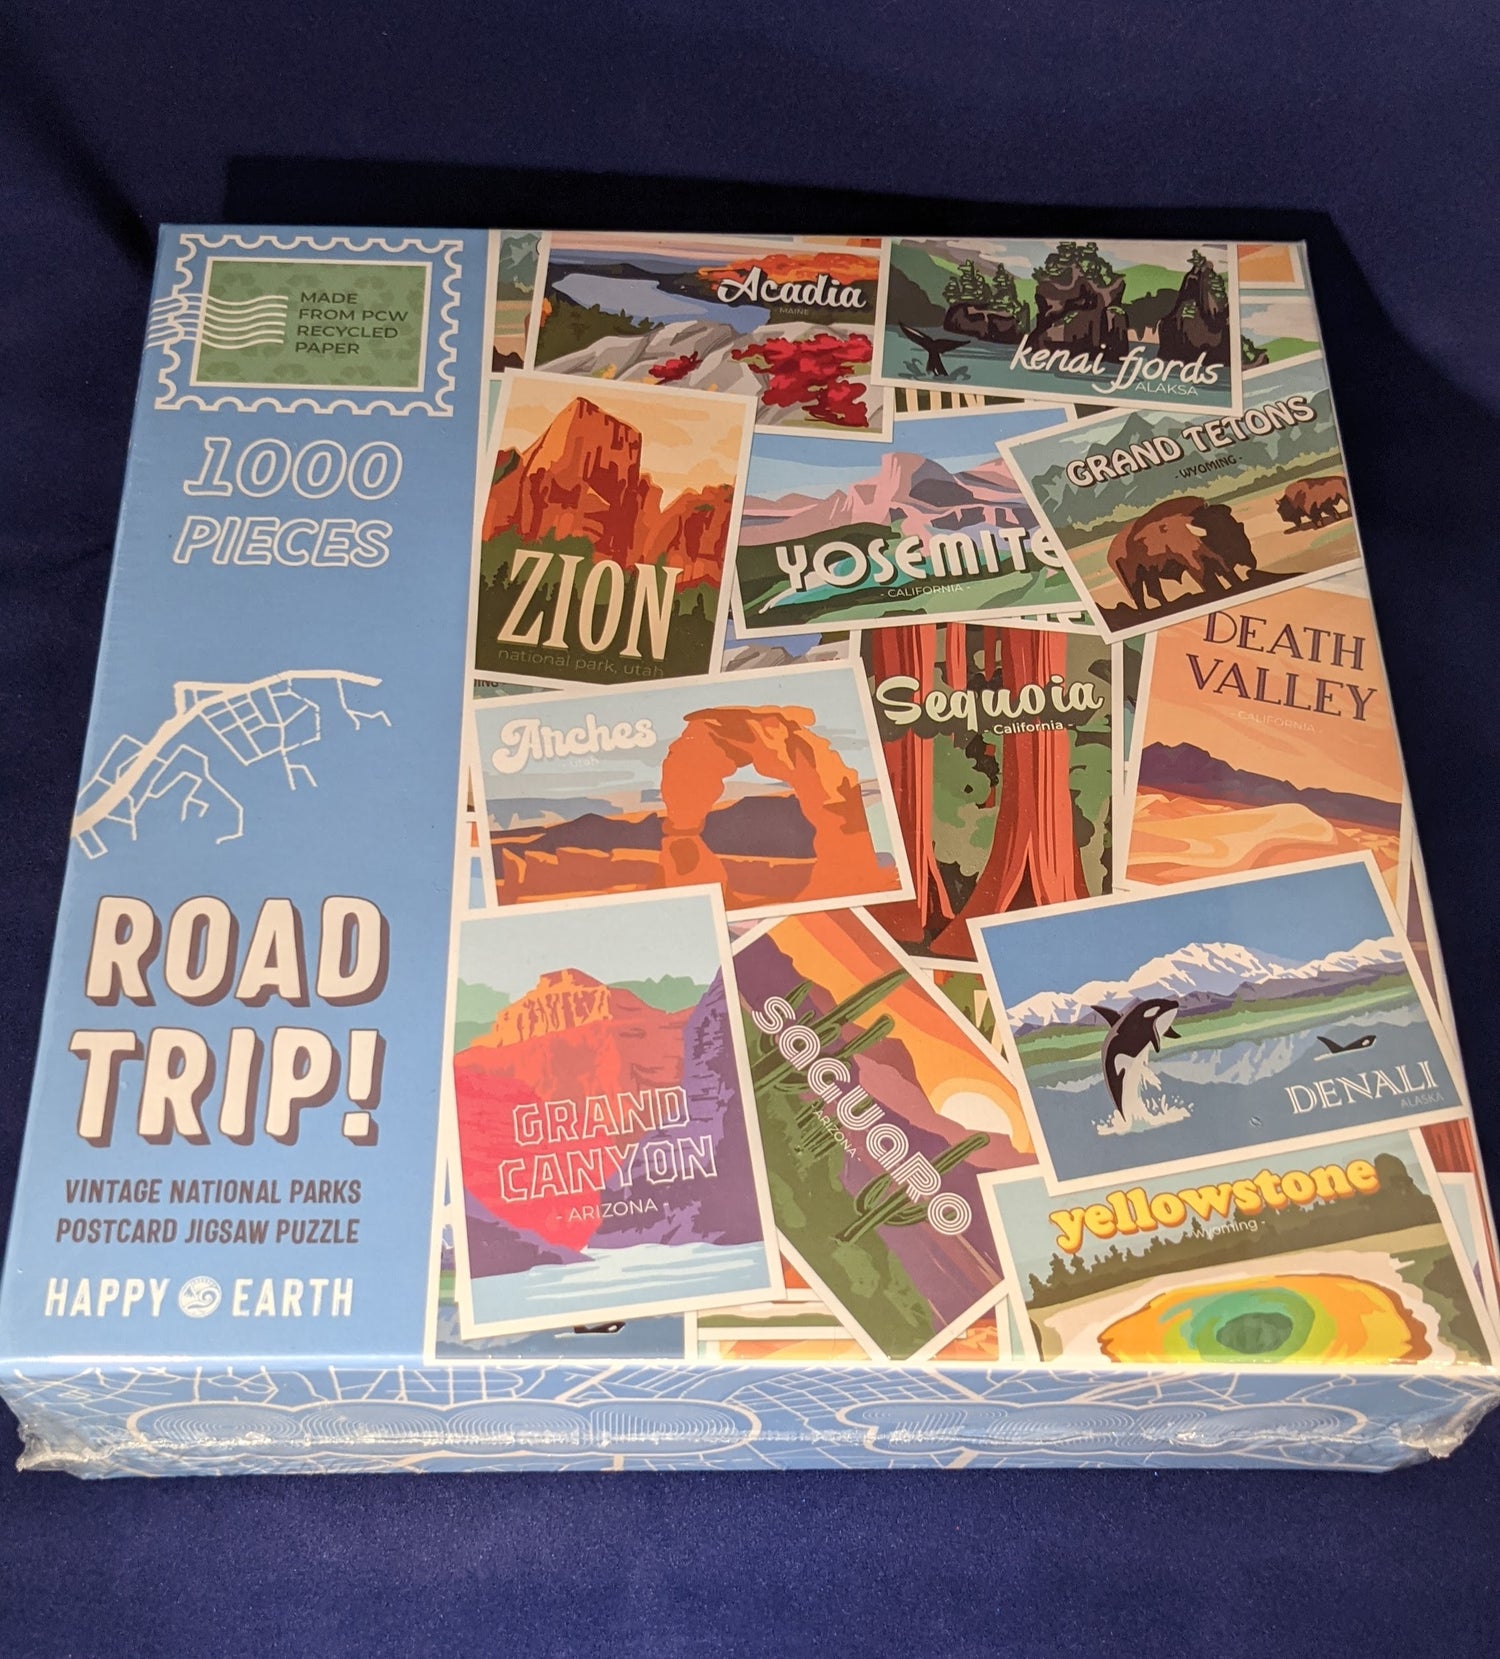 Roadtrip puzzle 1000 pieces by Happy Earth